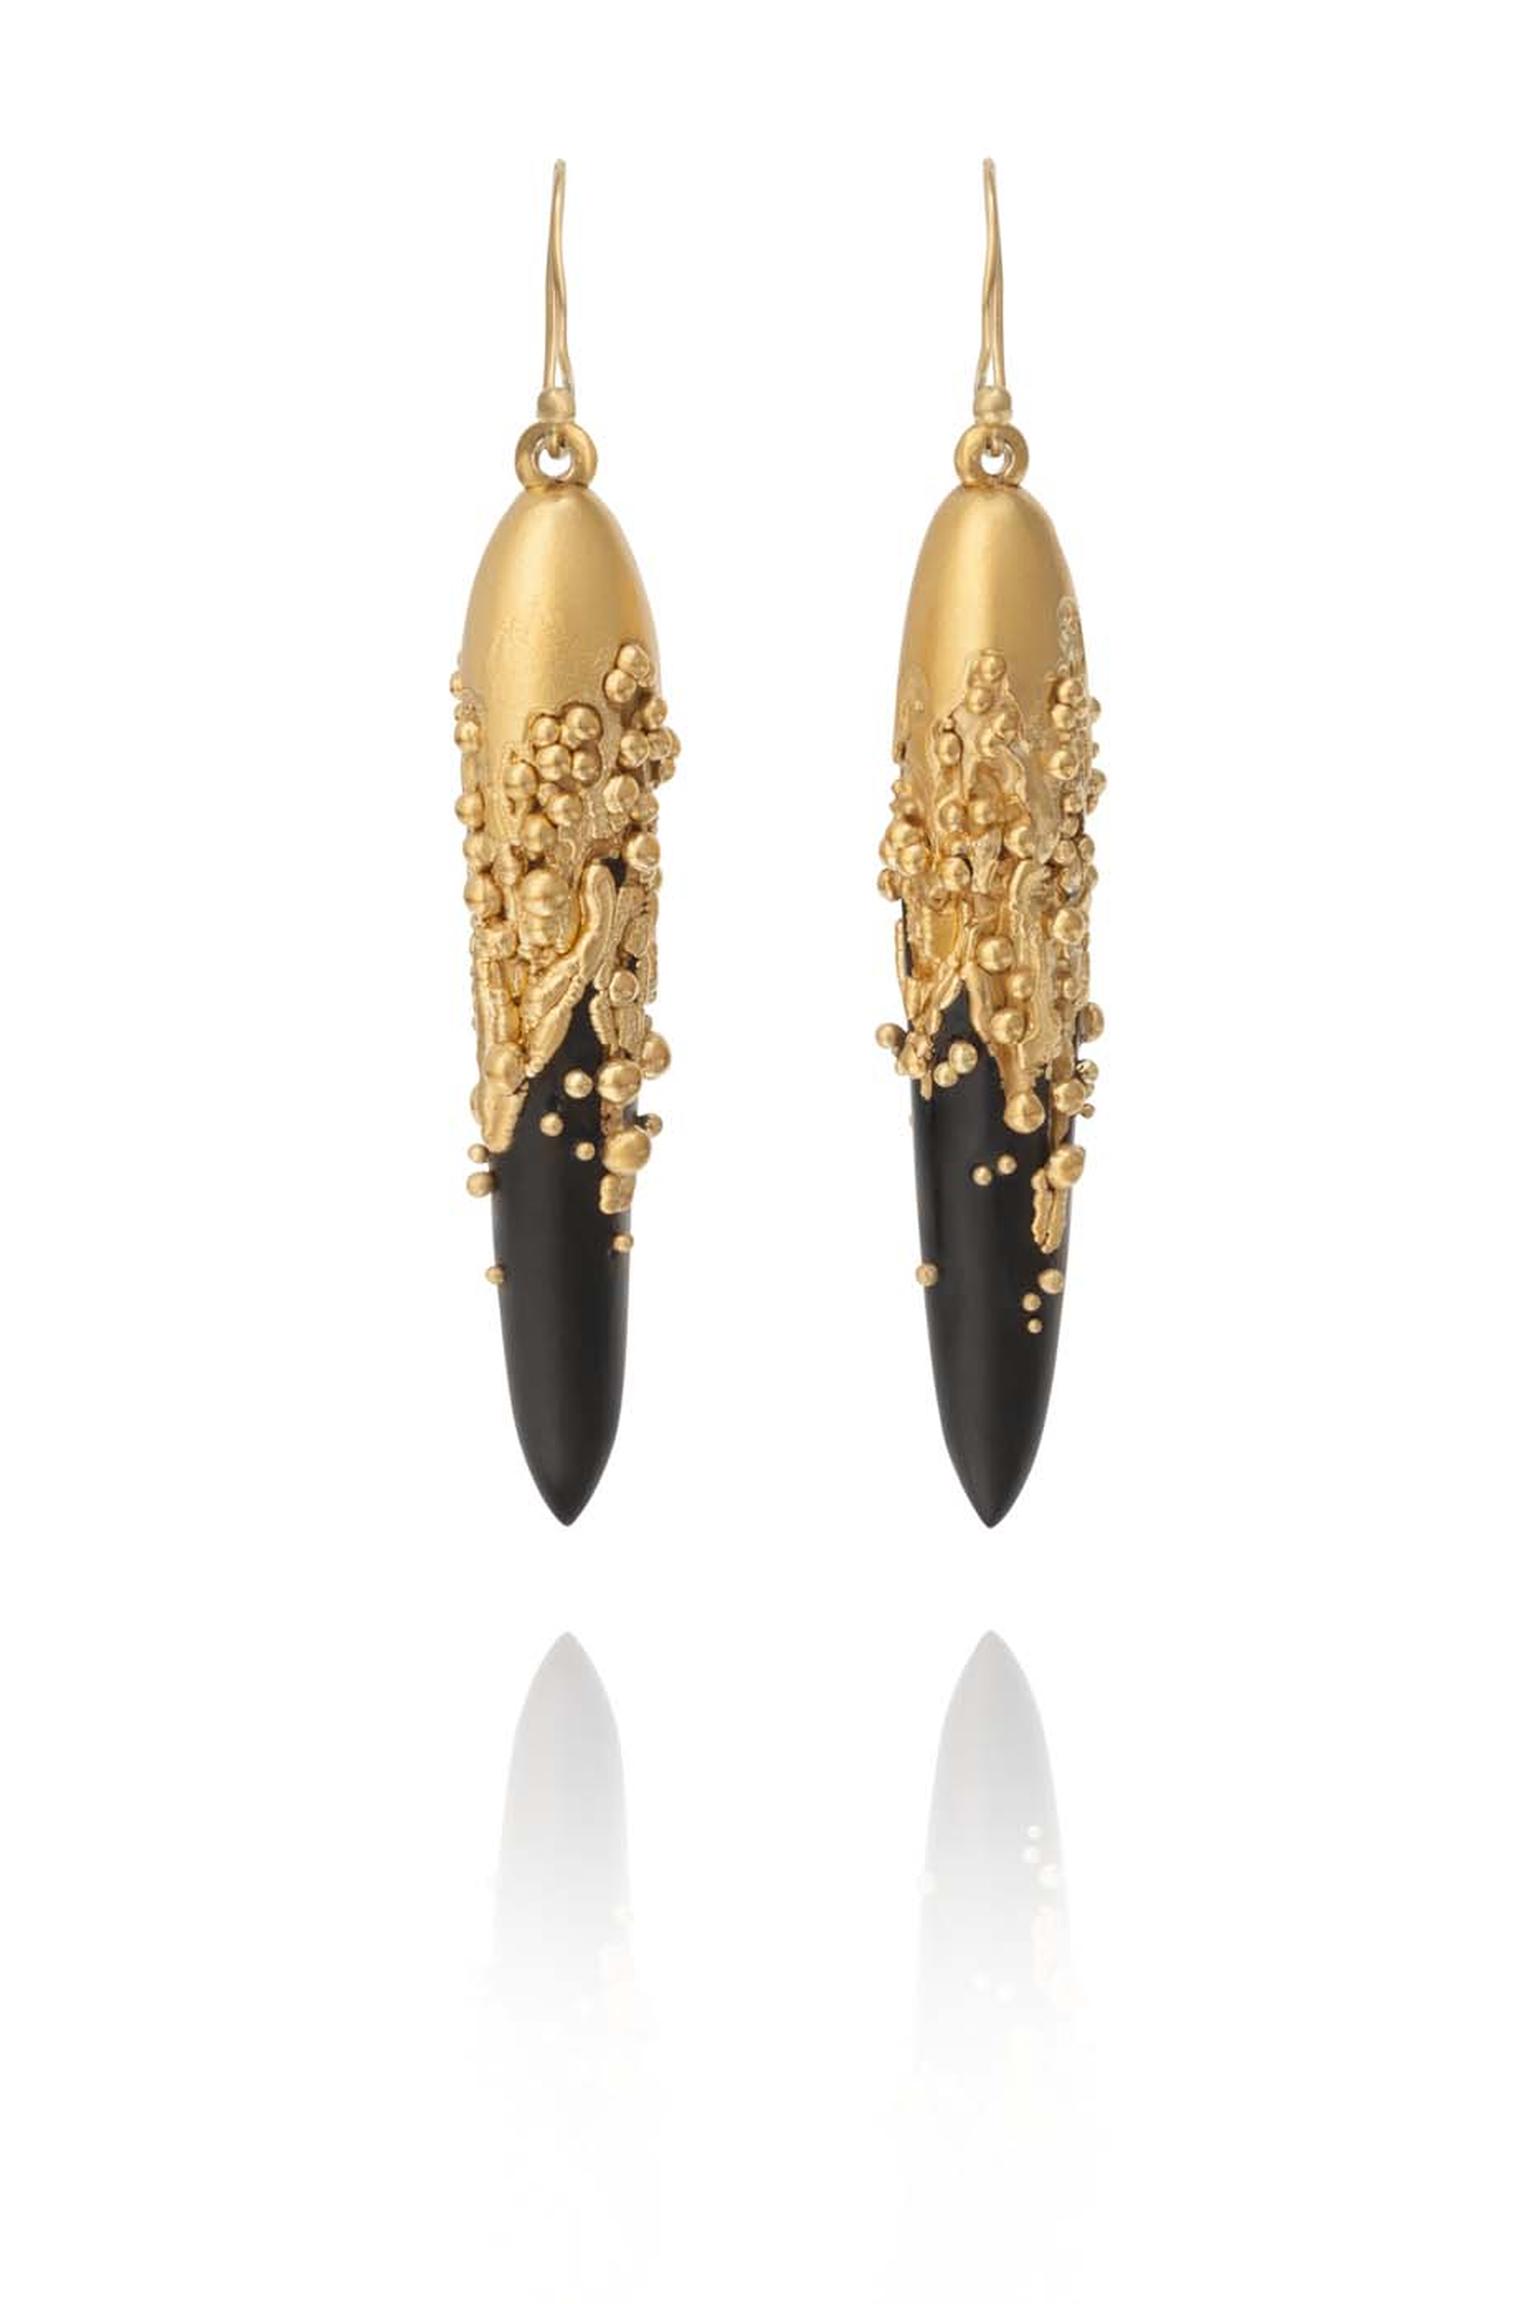 Jacqueline Cullen Whitby jet electro formed earrings in fine silver, gold-plated silver and gold (£650 - £1,250)